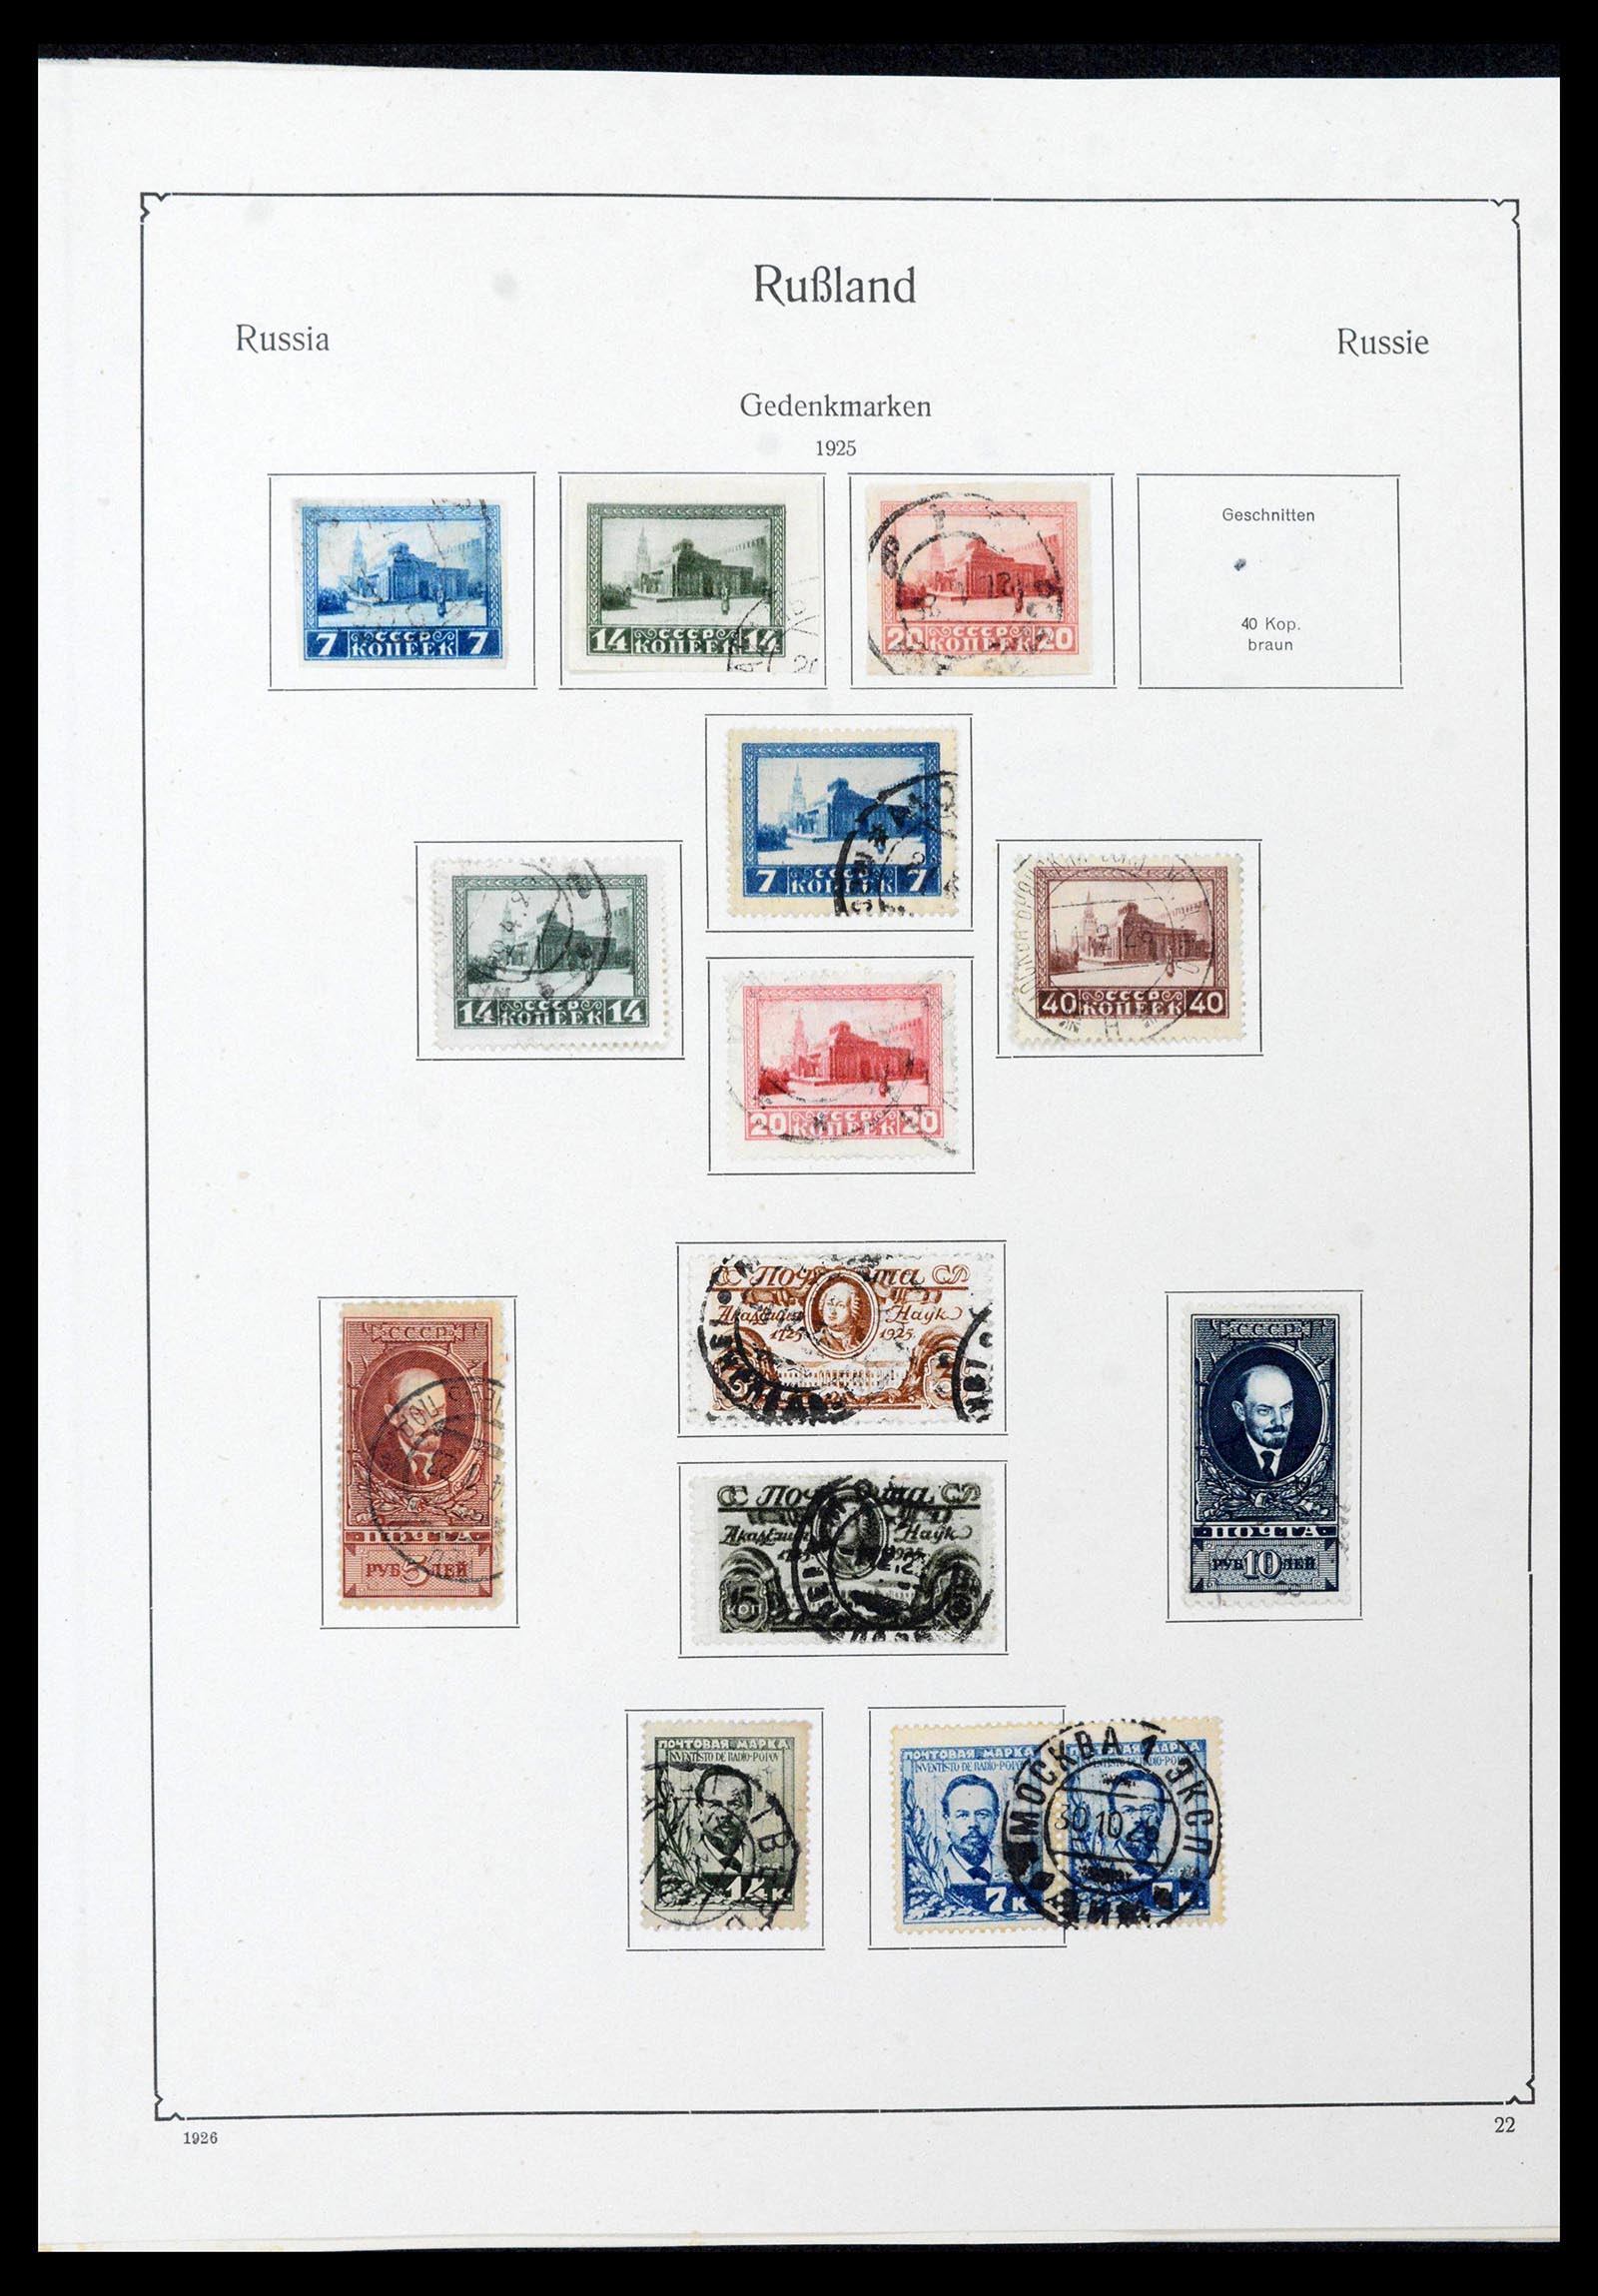 39086 0021 - Stamp collection 39086 Russia and territories 1858-1930.